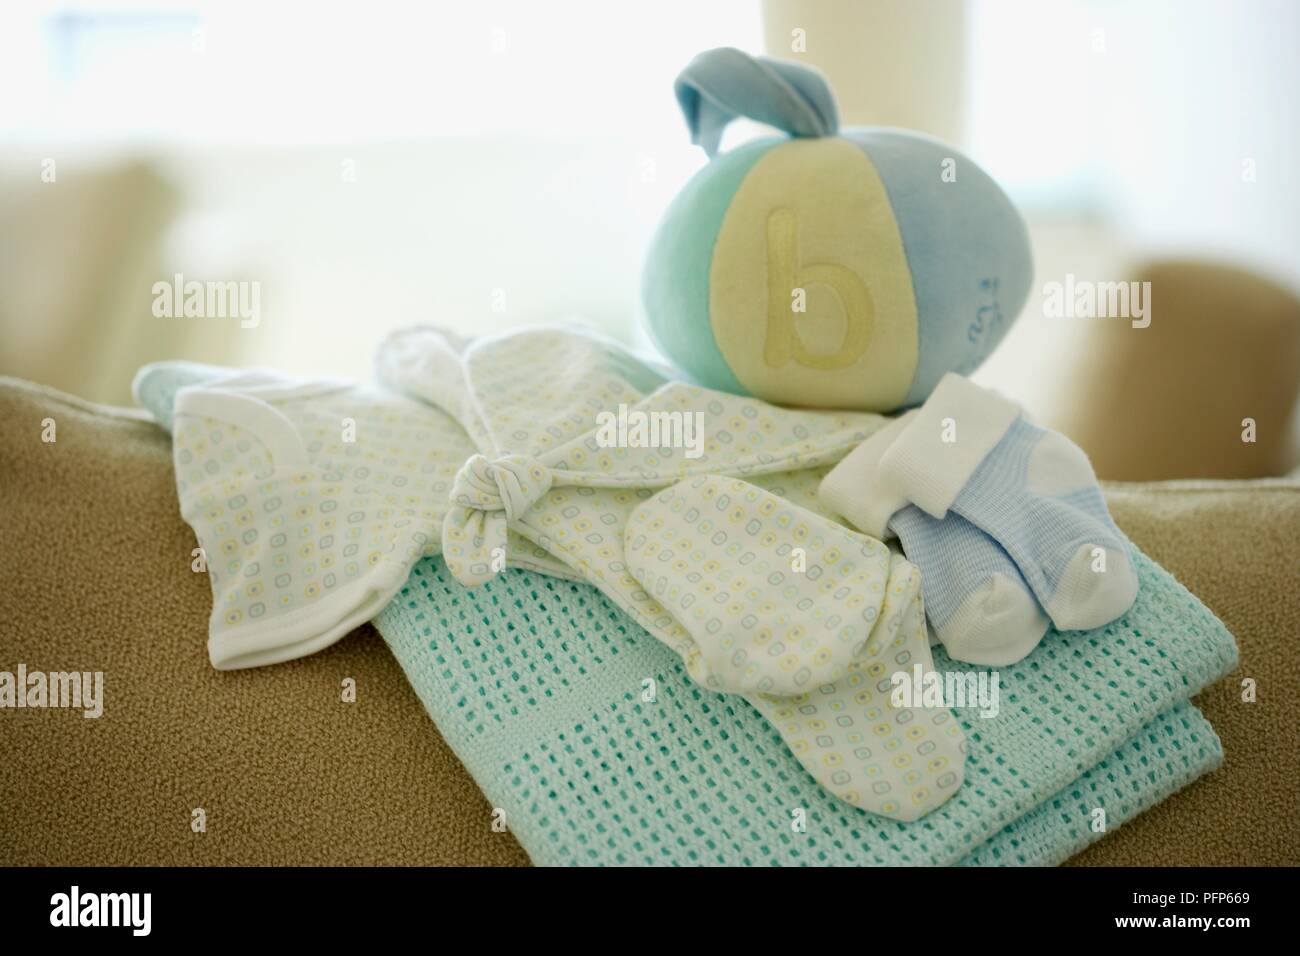 Baby blanket, clothing and ball Stock Photo